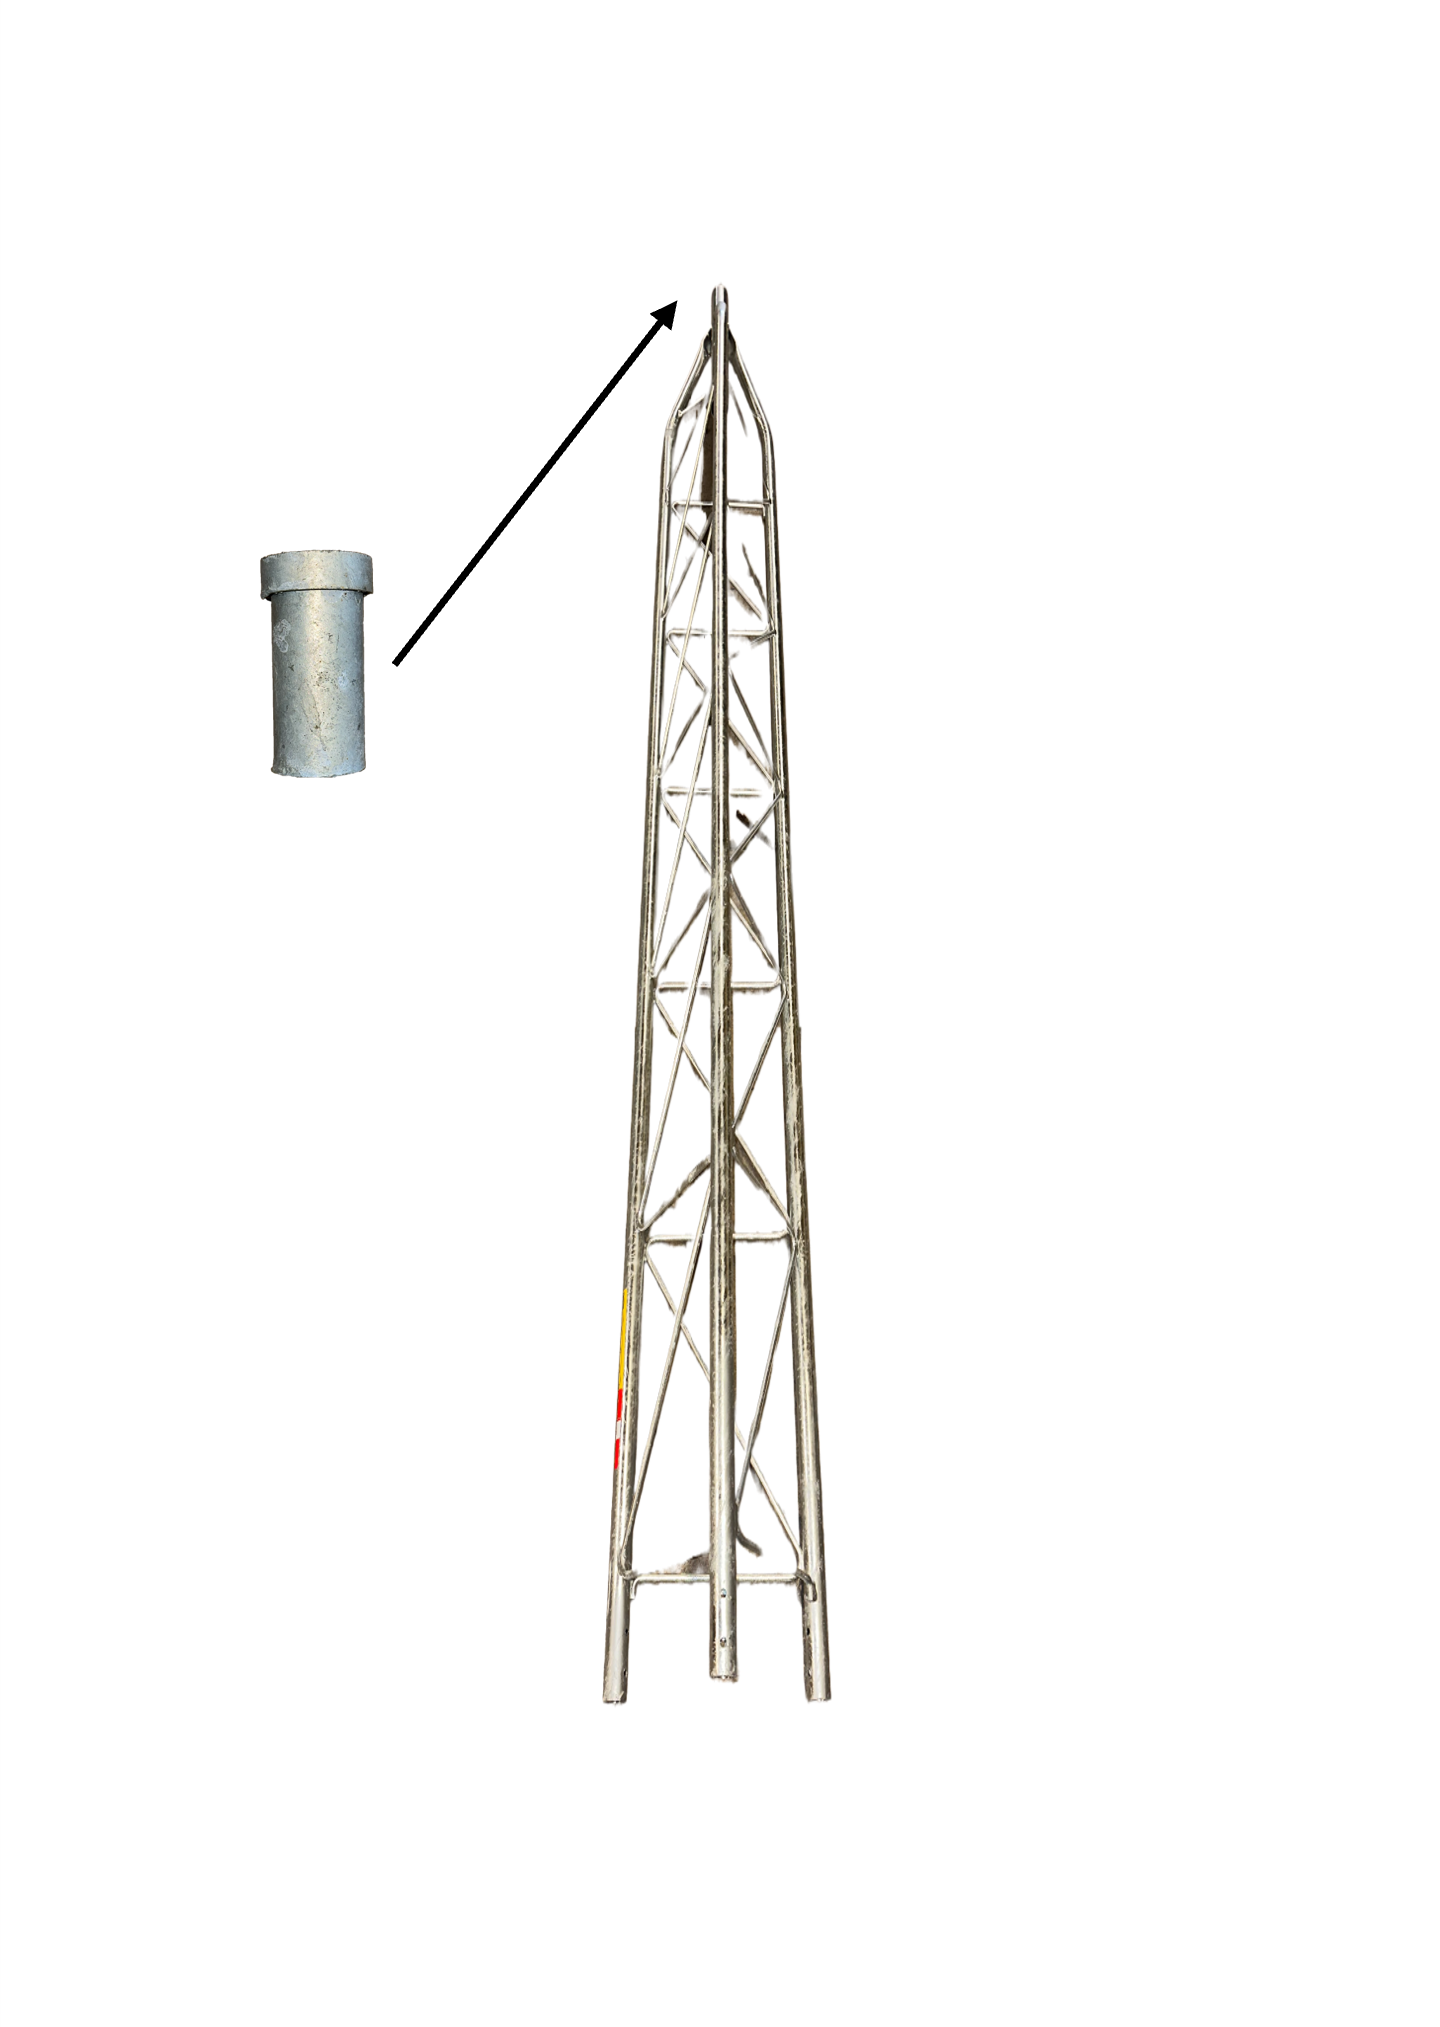 Amerite 25 Series 9 foot Tower Top Section with Removable Bushing